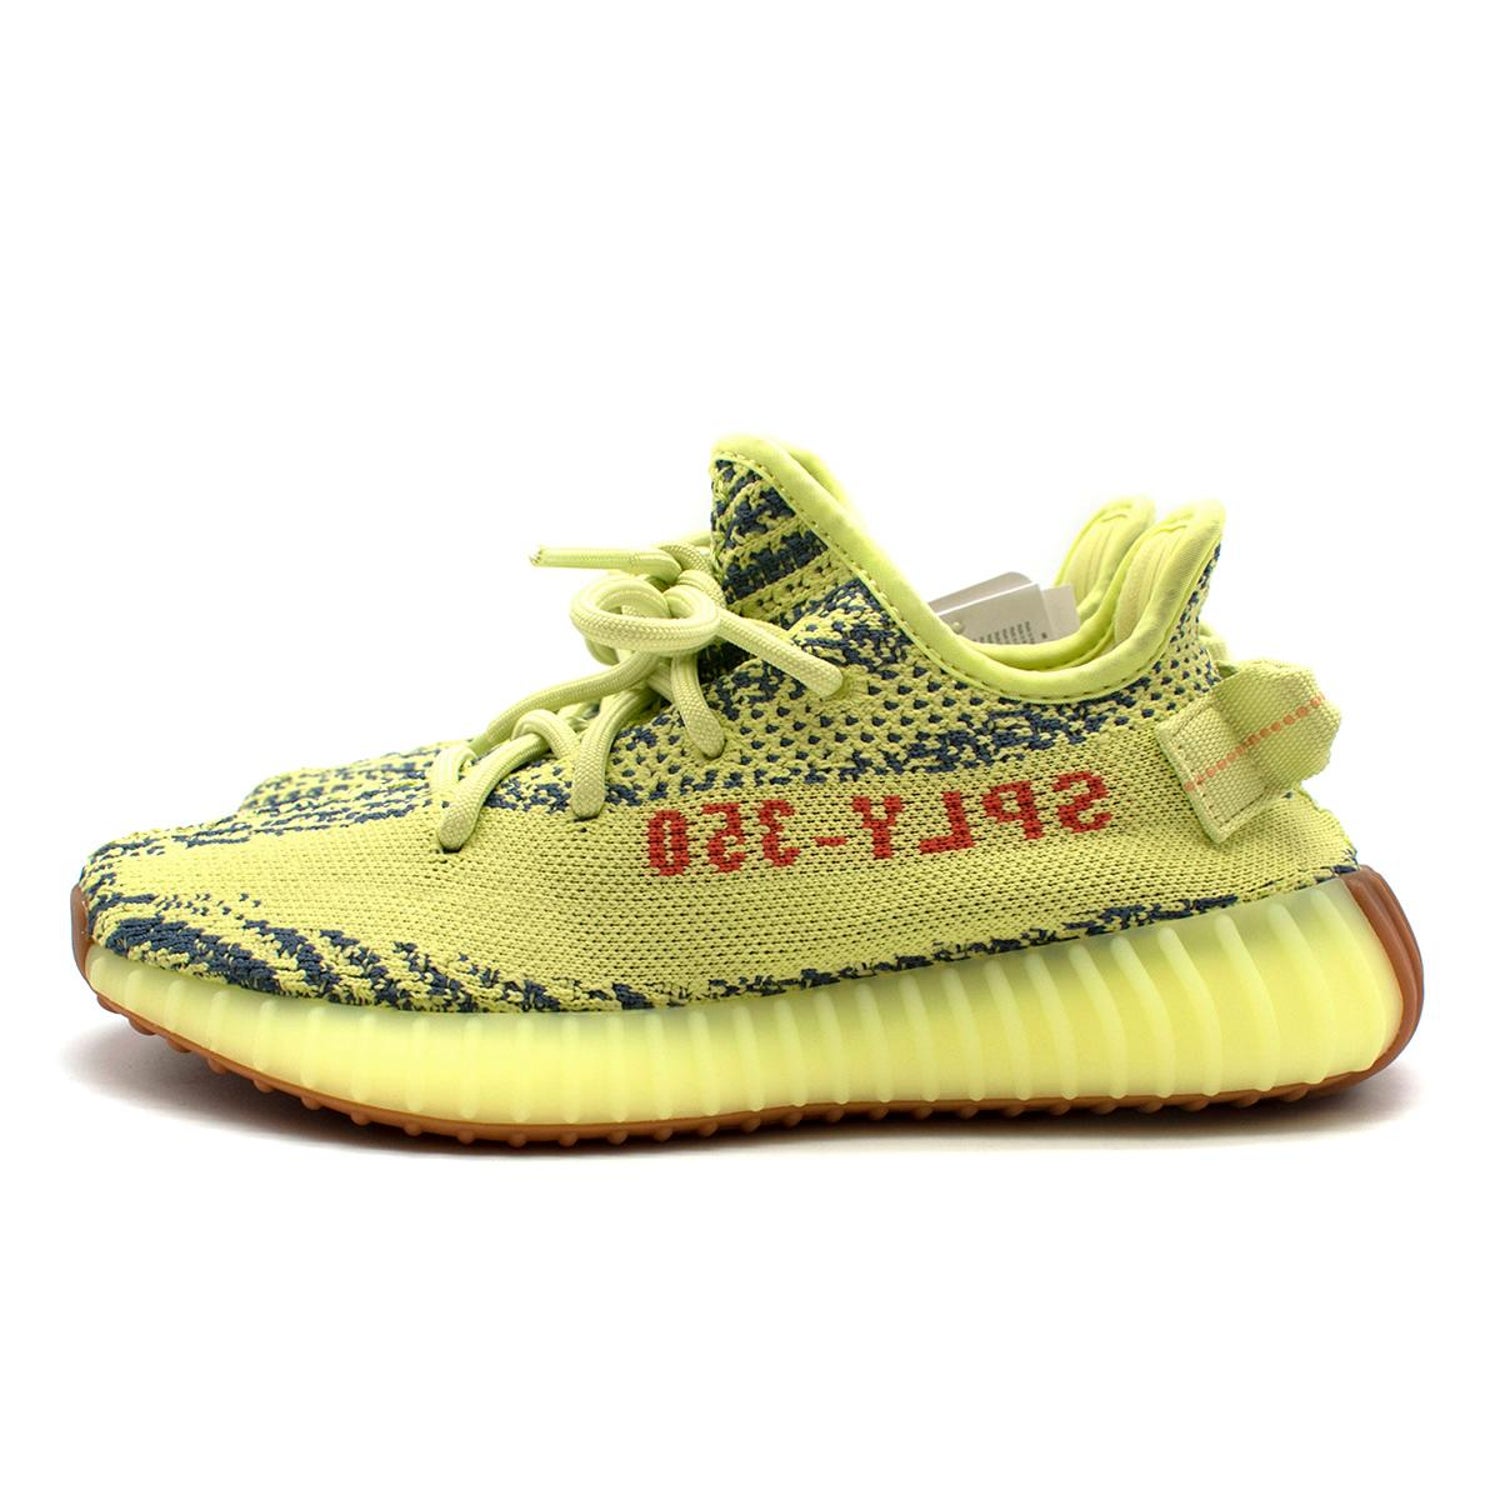 Yeezy Neon Yellow Boost 350 V2 Trainers - Us 6.5 For Sale at 1stDibs